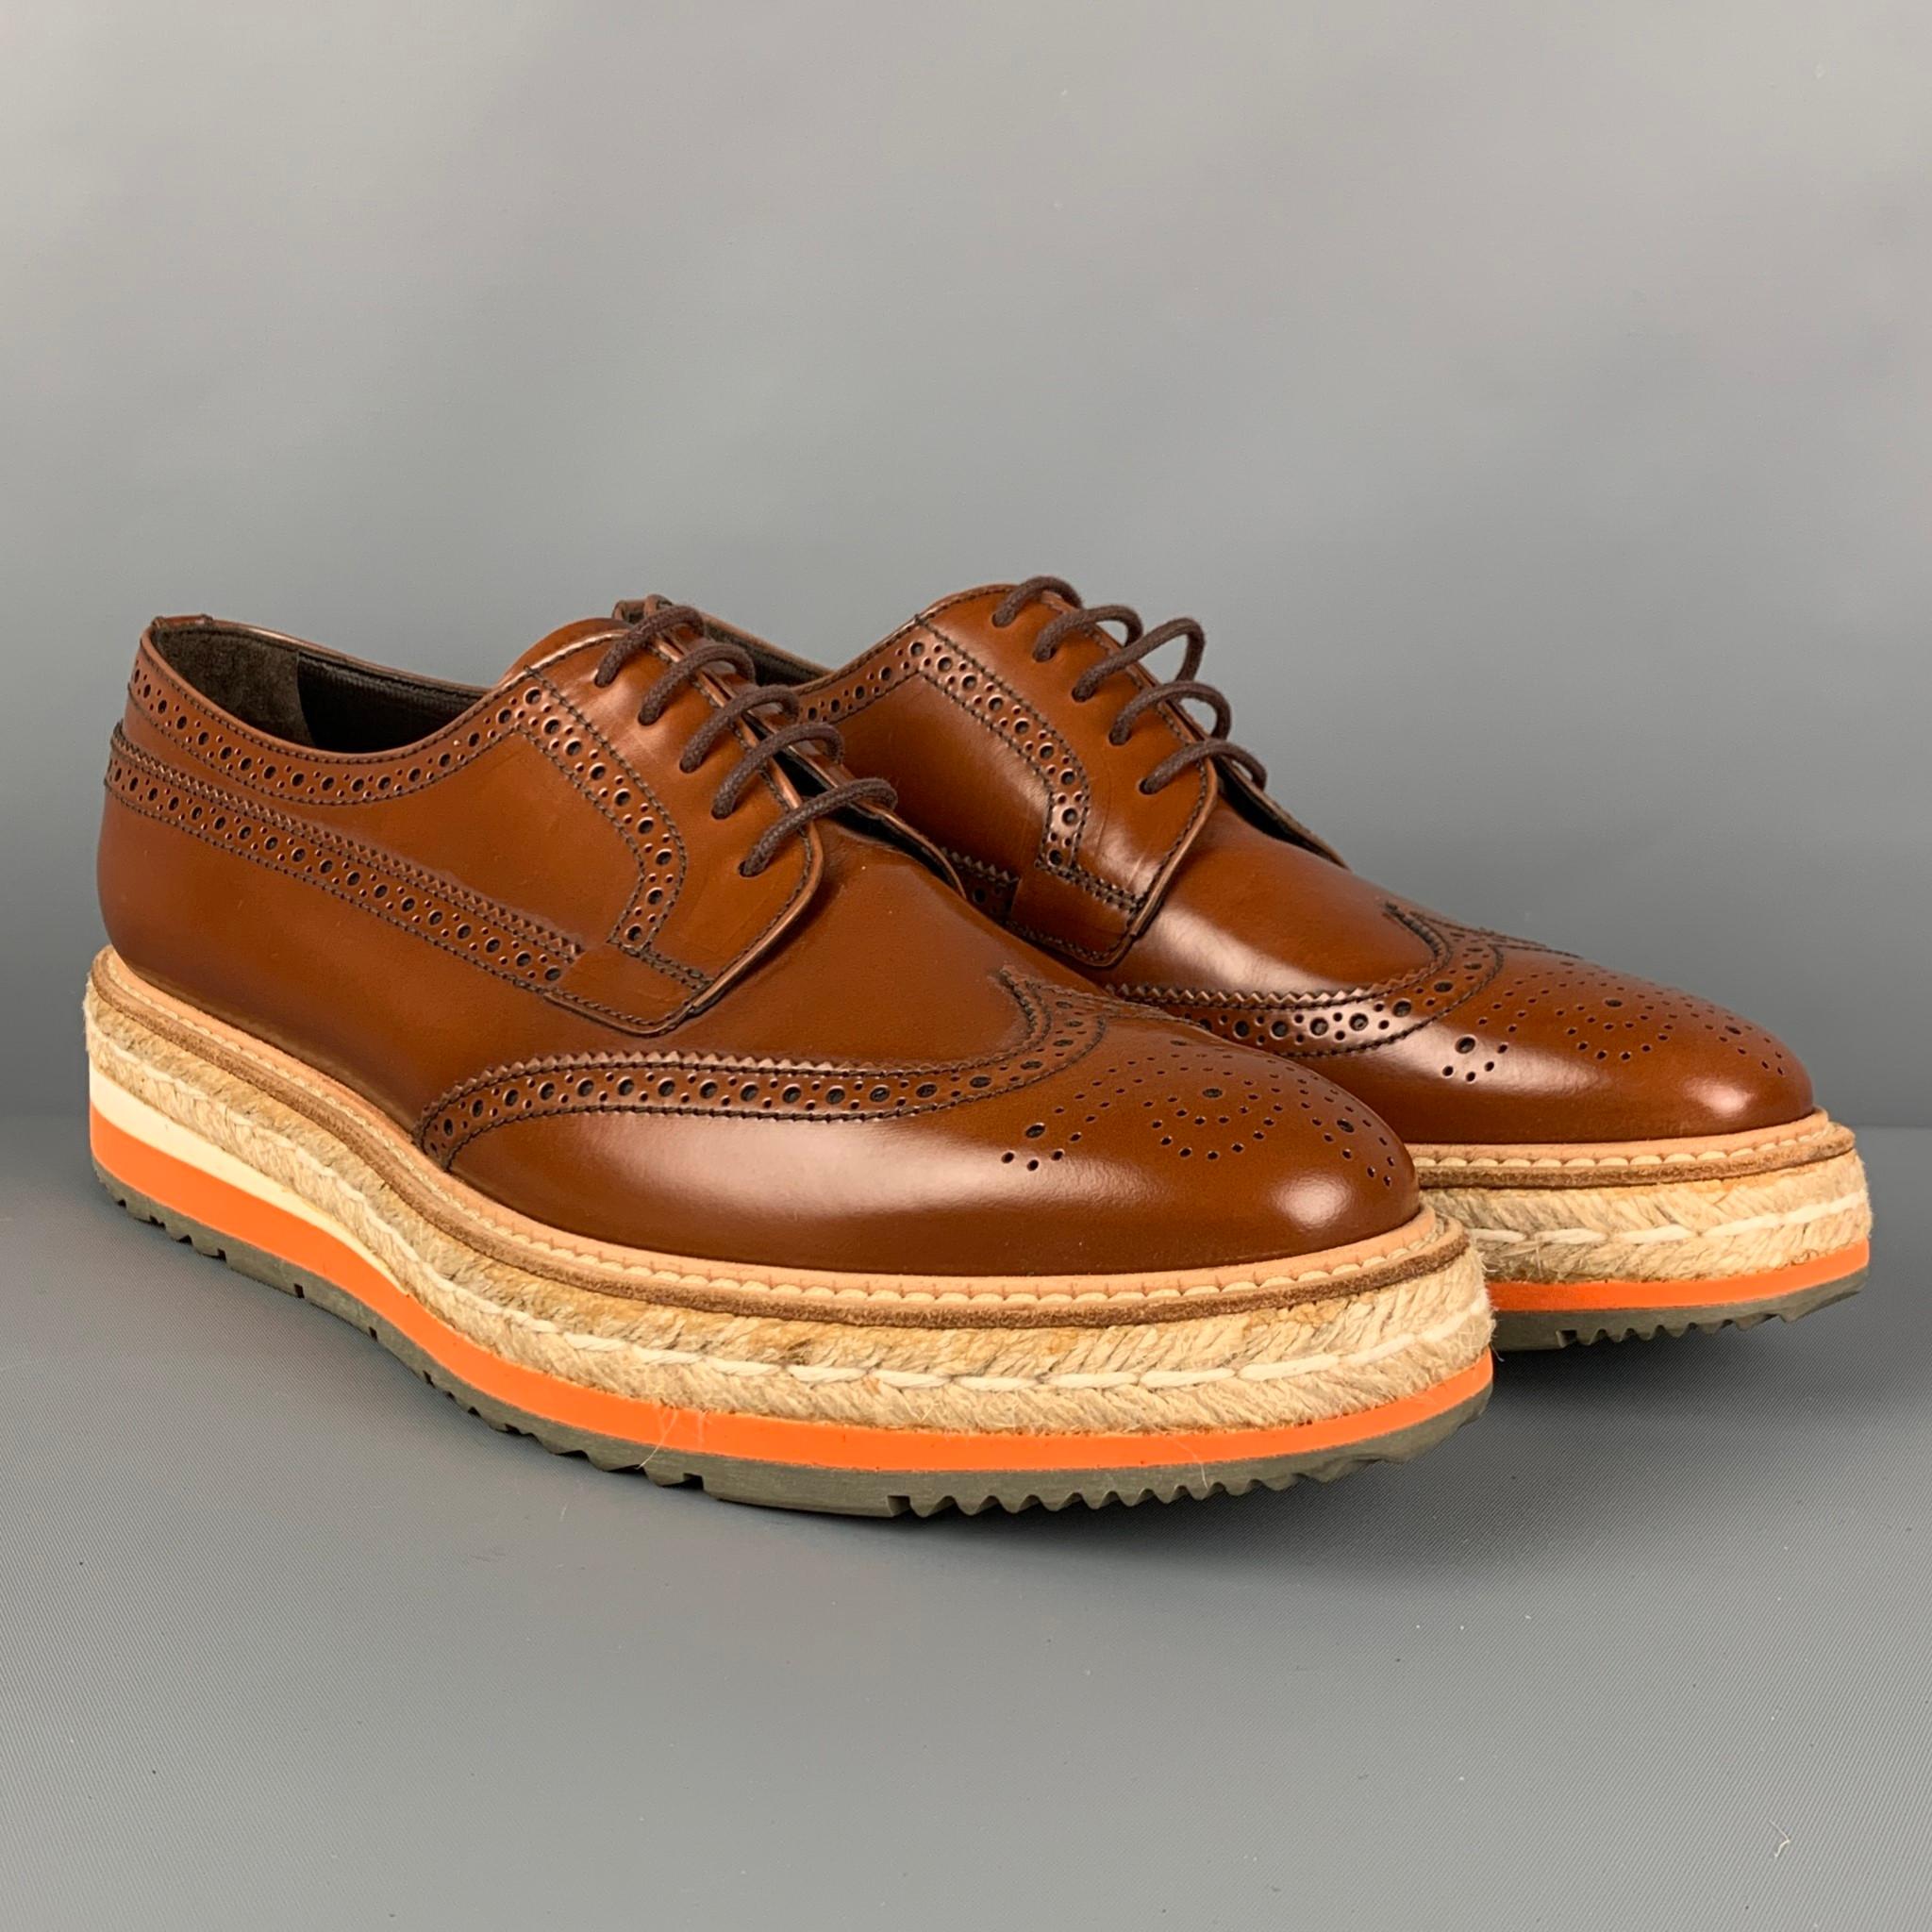 PRADA shoes comes in a tan perforated leather featuring a wingtip style, orange trim, jute trim platform sole, and a lace up closure. Made in Italy.

Very Good Pre-Owned Condition.
Marked: 40.5

Outsole: 11.5 in. x 4 in. 